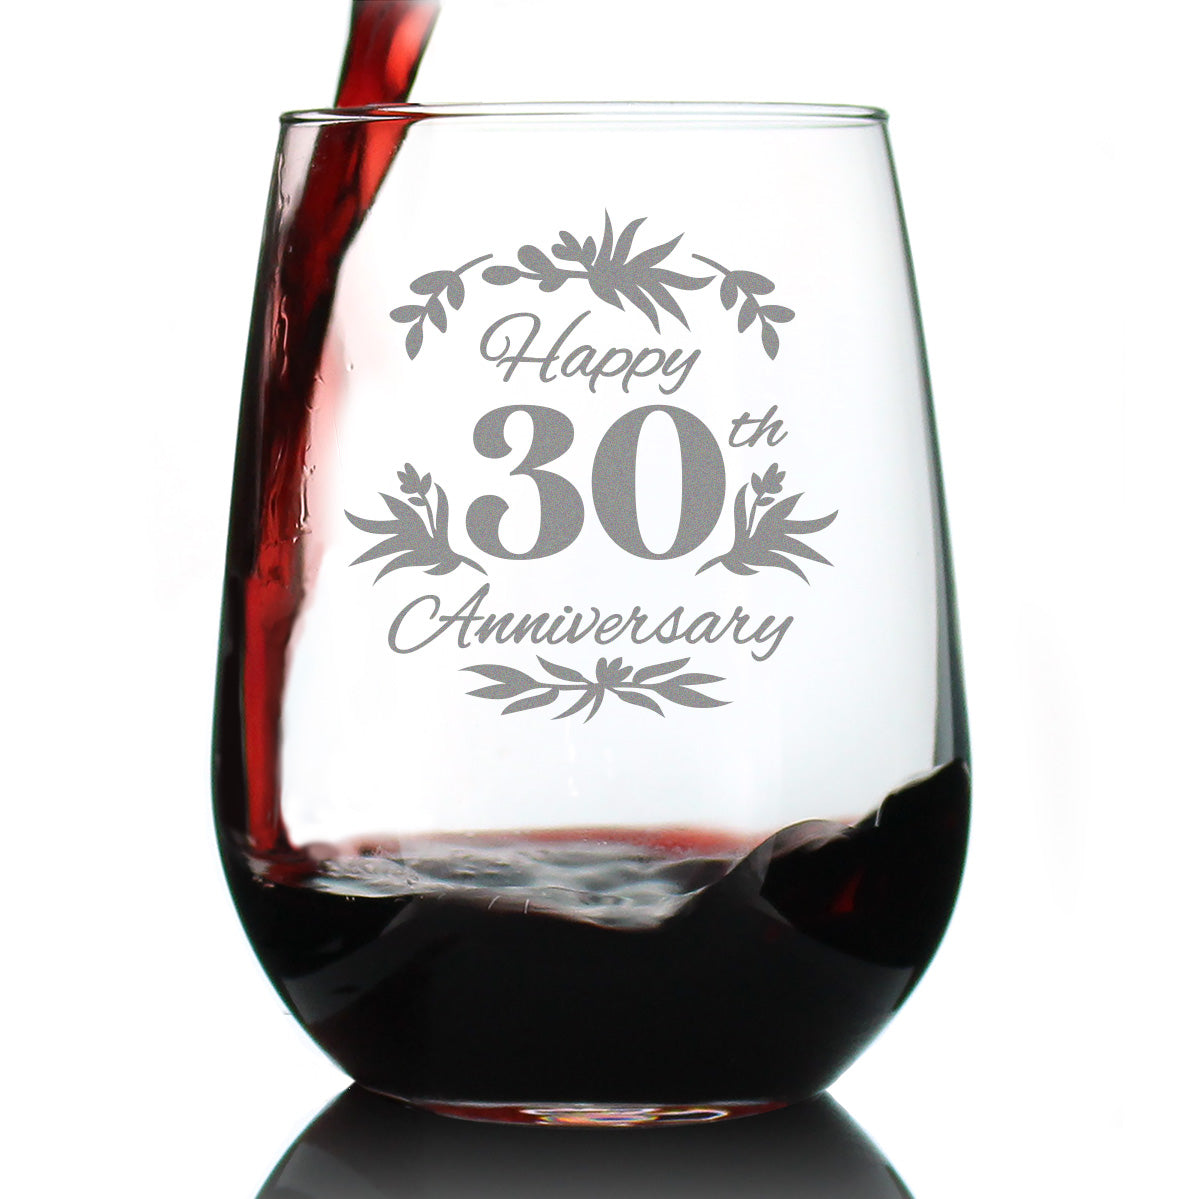 Happy 30th Anniversary - Stemless Wine Glass Gifts for Women &amp; Men - 30 Year Anniversary Party Decor - Large Glasses